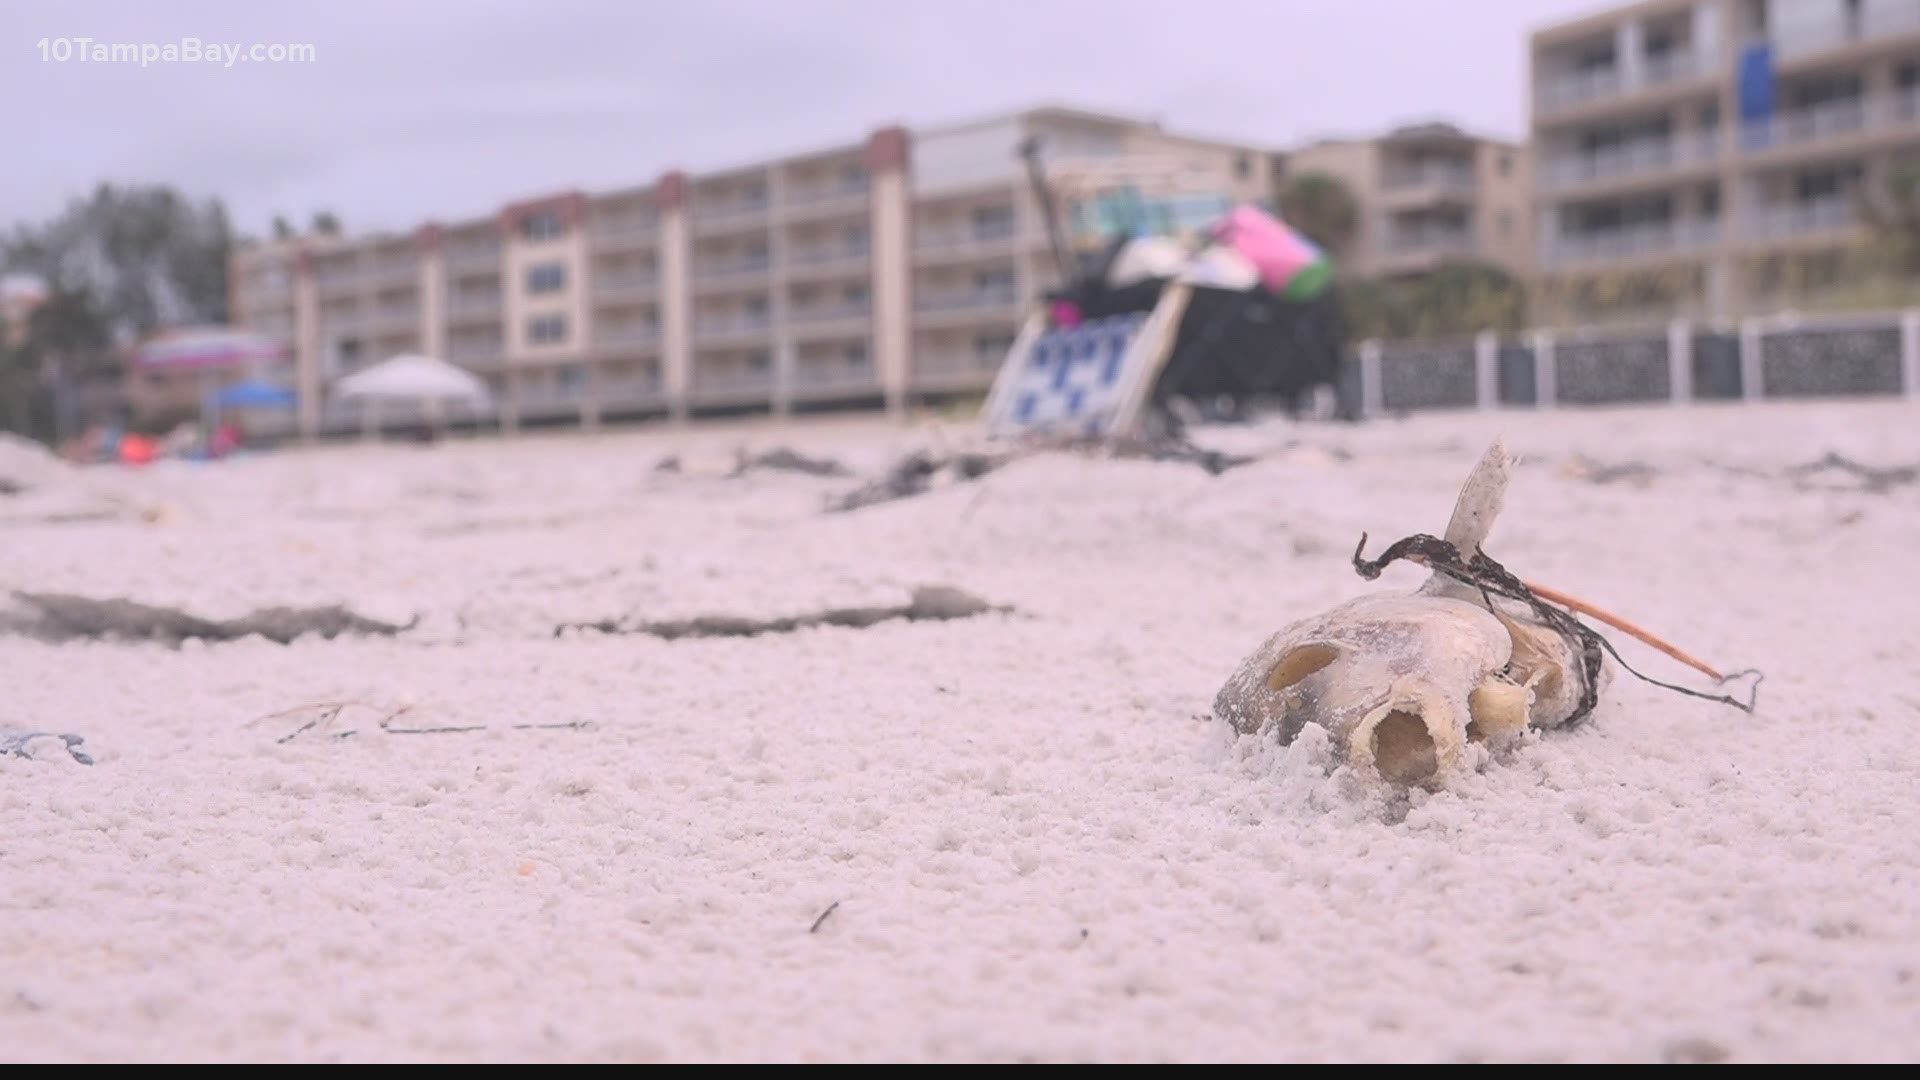 A high concentration of the harmful bloom was reported near Redington Beach, with a medium concentration near Clearwater Beach.